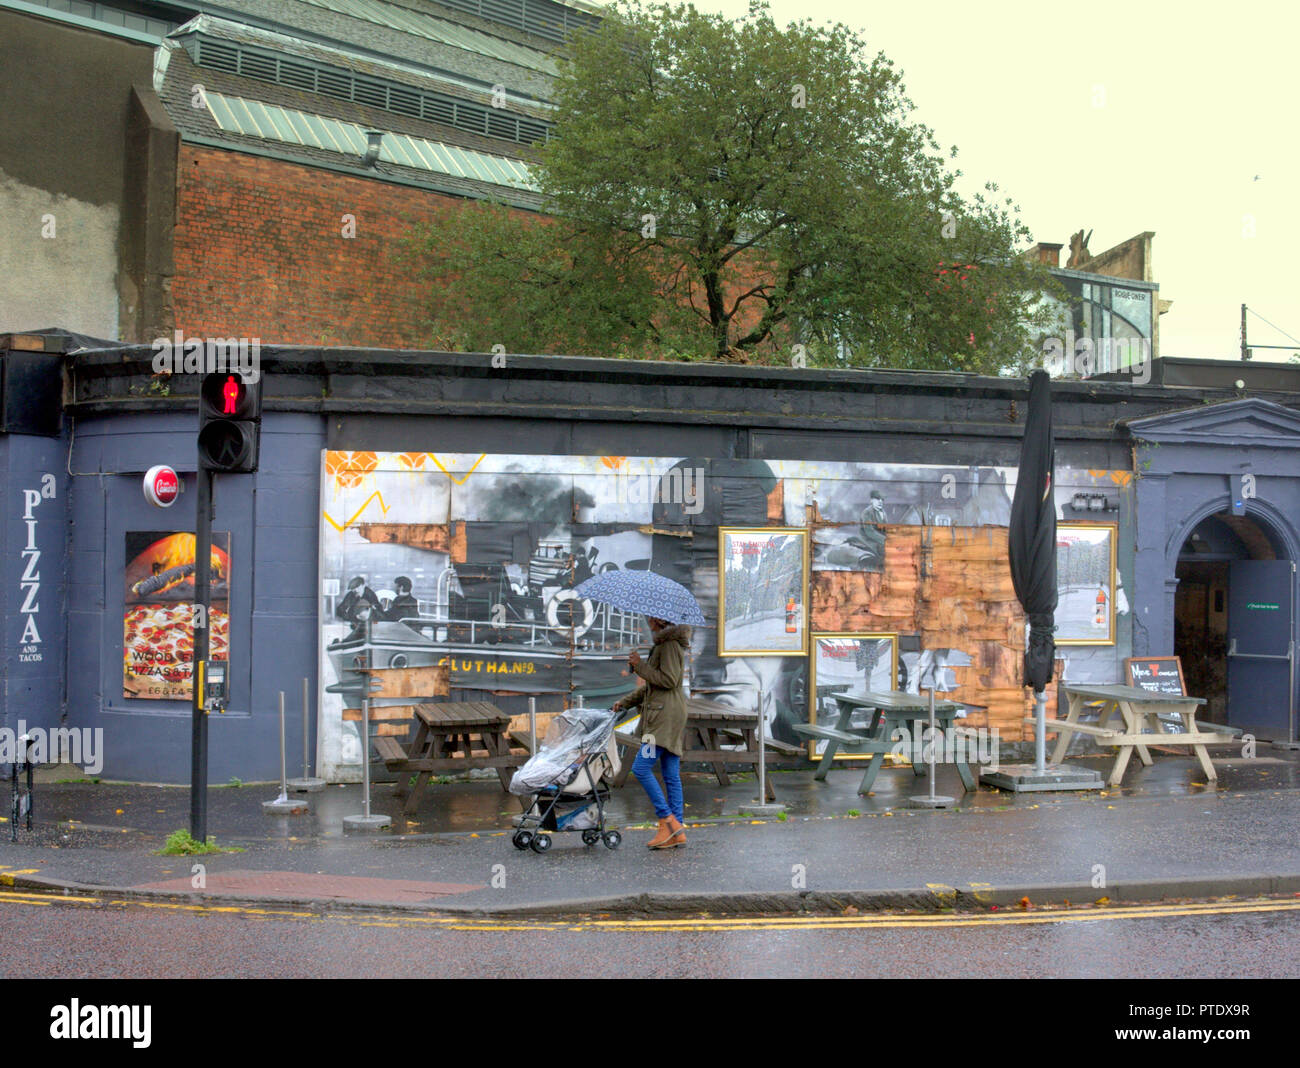 Glasgow, Scotland, UK, 9th October, 2018. UK Weather: Rain and wind over the last few days have taken their toll on the famous mural of the Clutha bar helicopter tragedy scene with parts of the Stan Laurel portrait suffering from the windy wet weather.The famous people depicted have a connection directly with the bar or city. Gerard Ferry/Alamy news Credit: gerard ferry/Alamy Live News Stock Photo